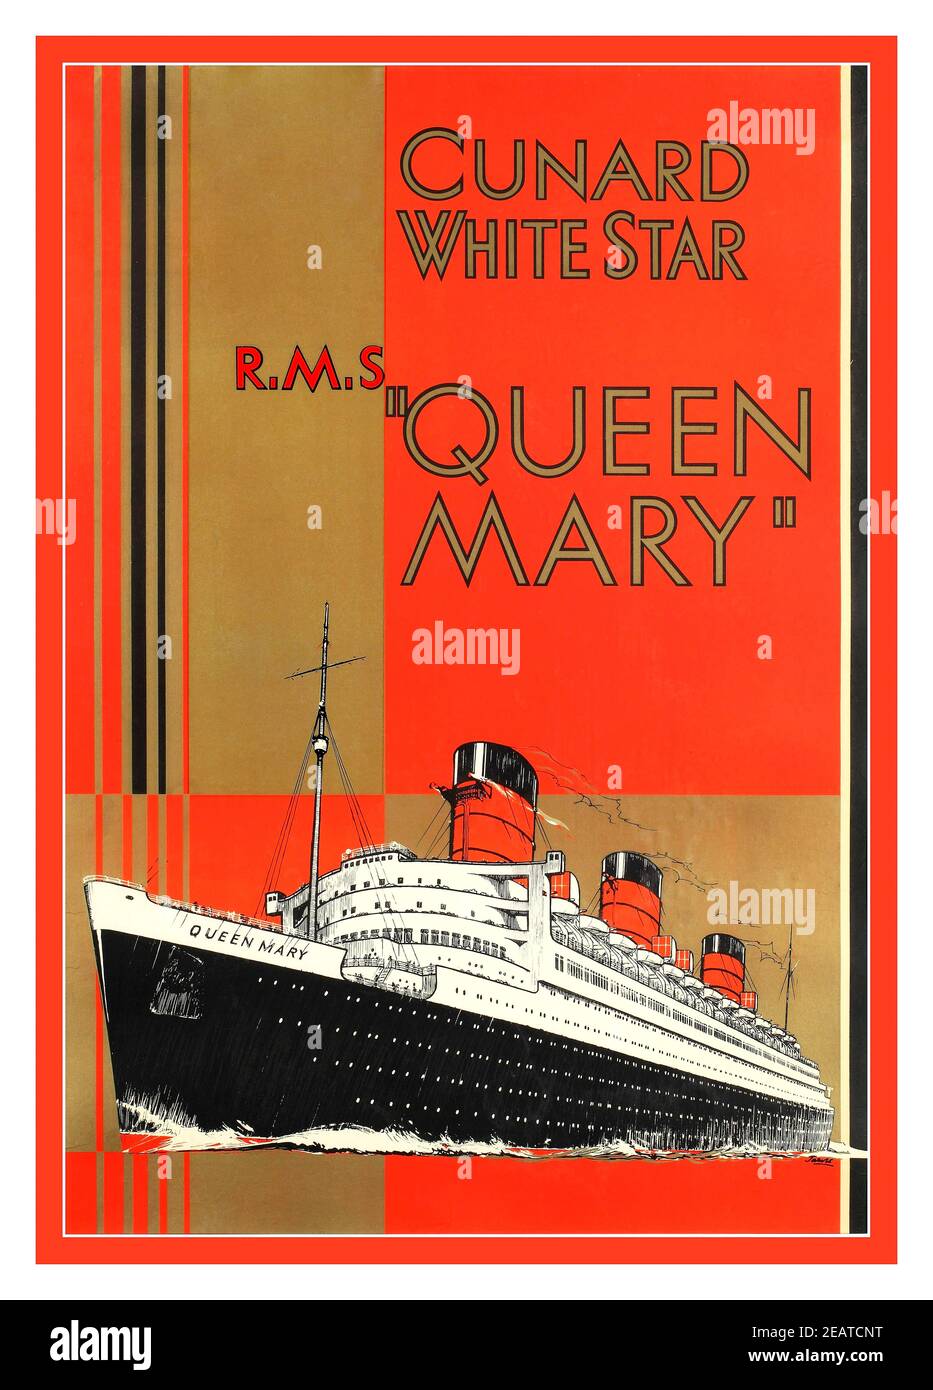 RMS QUEEN MARY 1930's CUNARD BIANCO STELLA Vintage Ocean Liner Poster di William Jarvis. Cunard White Star R.M.S Queen Mary, poster litografico originale stampato da British Color Printing Co. Ltd 1936 RMS Queen Mary 1936 Poster promozionale per la nave ammiraglia Ocean Liner di Cunard-White Star Line Poster design di William Howard Jarvis (1903-1964). Foto Stock